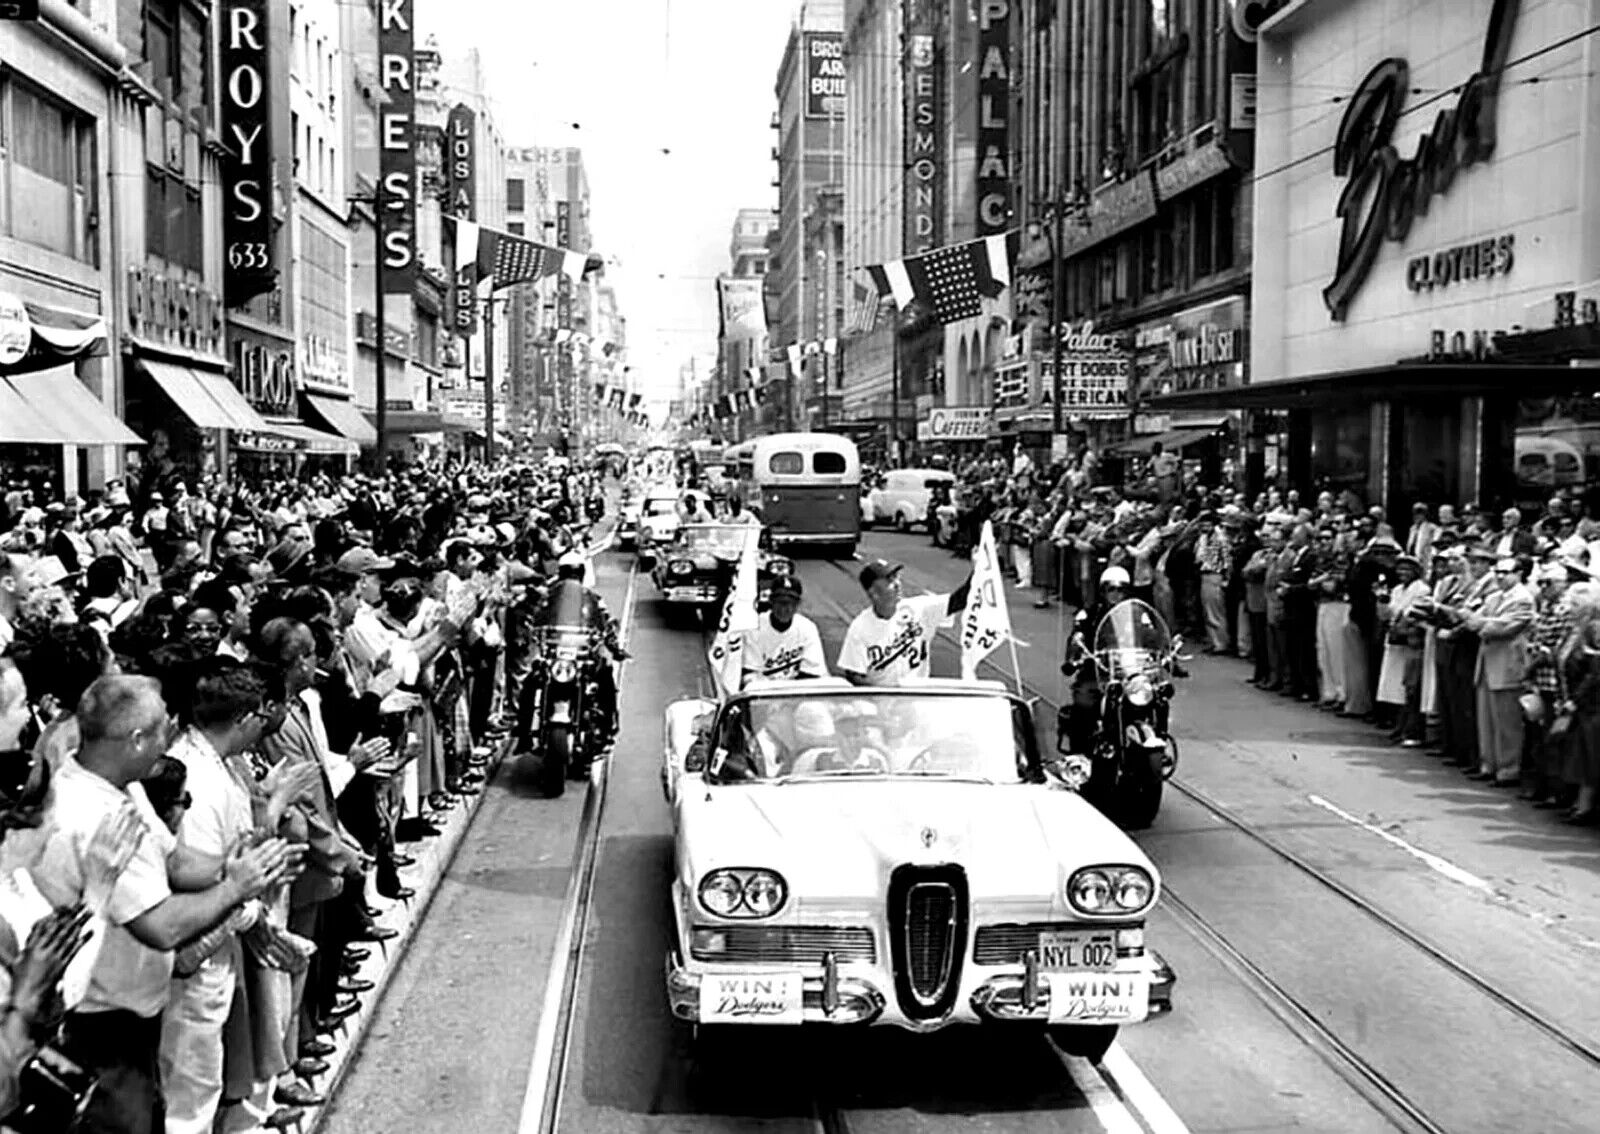 1958 DODGERS Arrival in Los Angeles PARADE Retro Baseball Picture Photo 8.5x11